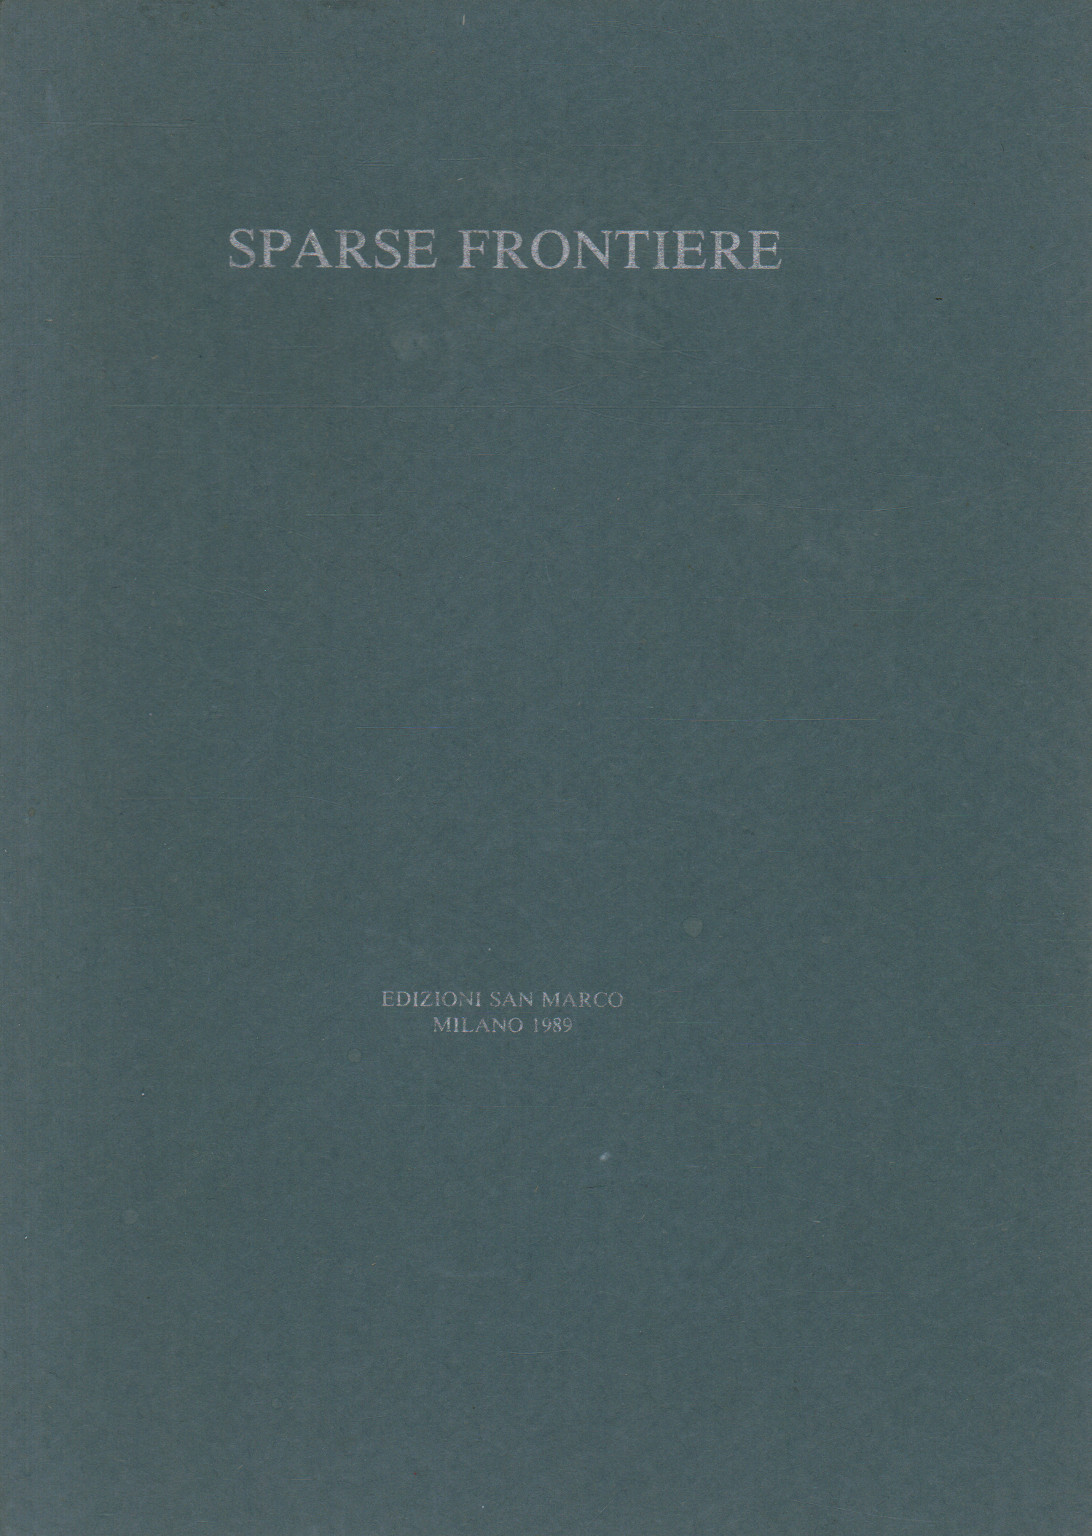 Sparse frontiere, s.a.